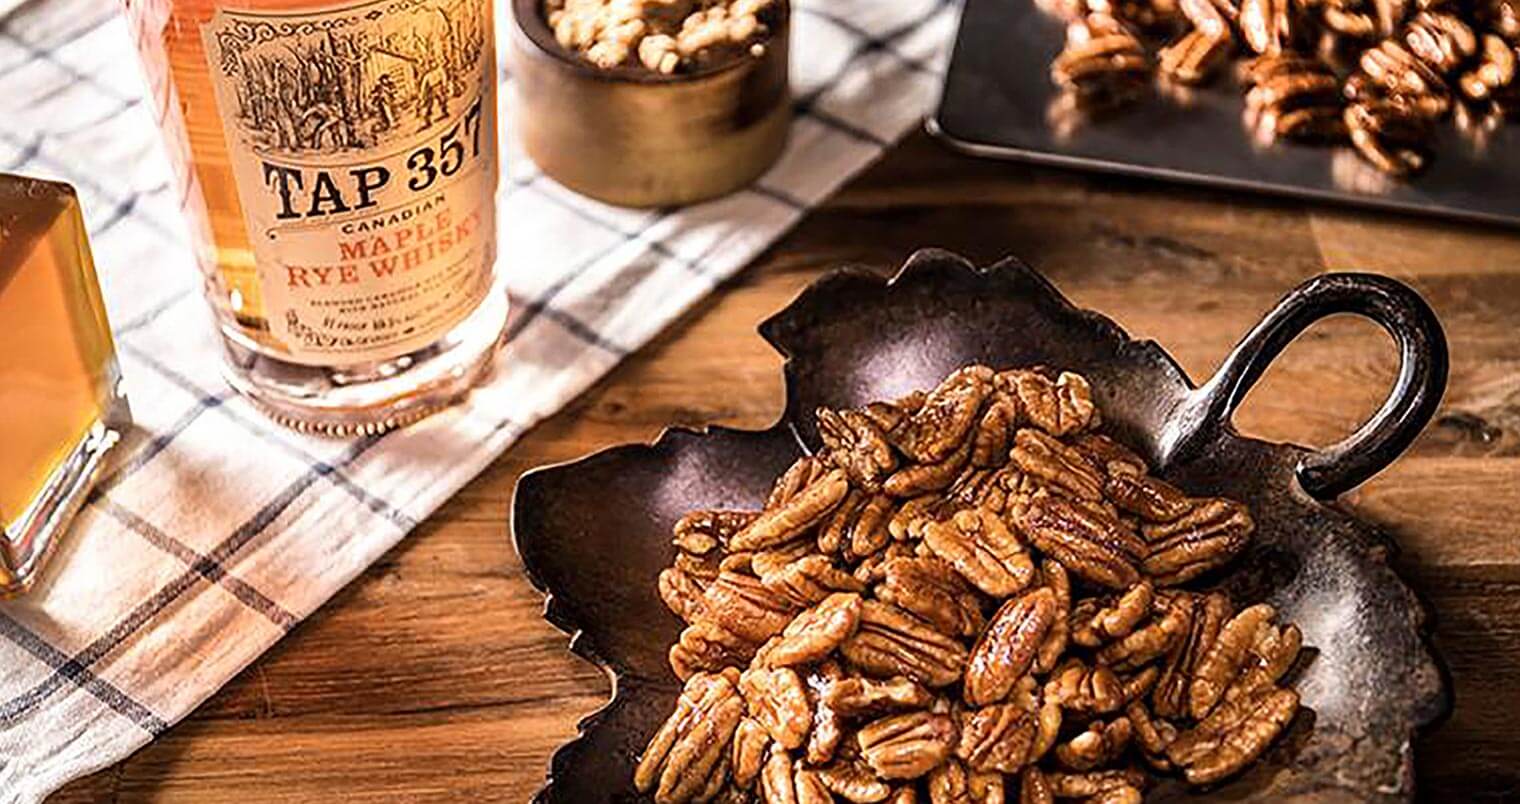 Tap 357 Maple Whisky Pecans, featured image